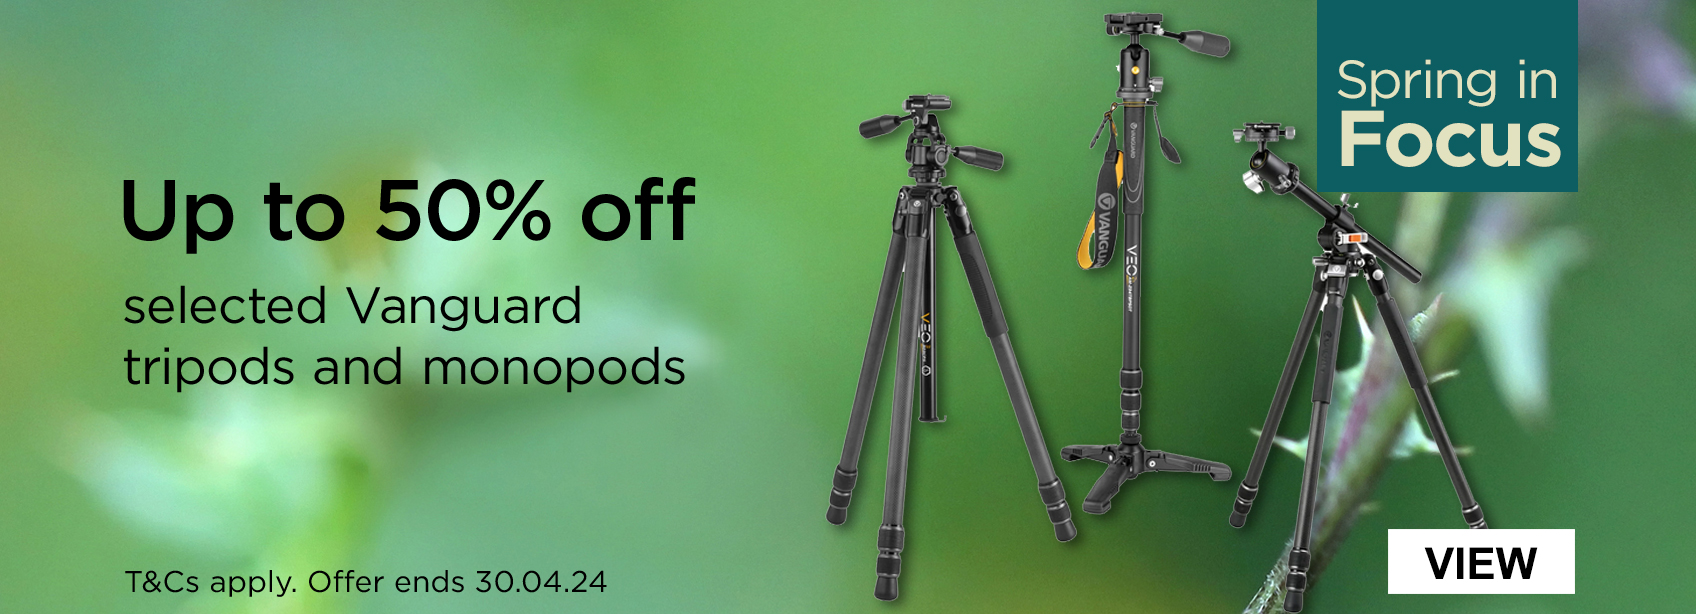 Up to 50% off selected Vanguard tripods and monopods (T&Cs apply. Offer ends 30.04.24)